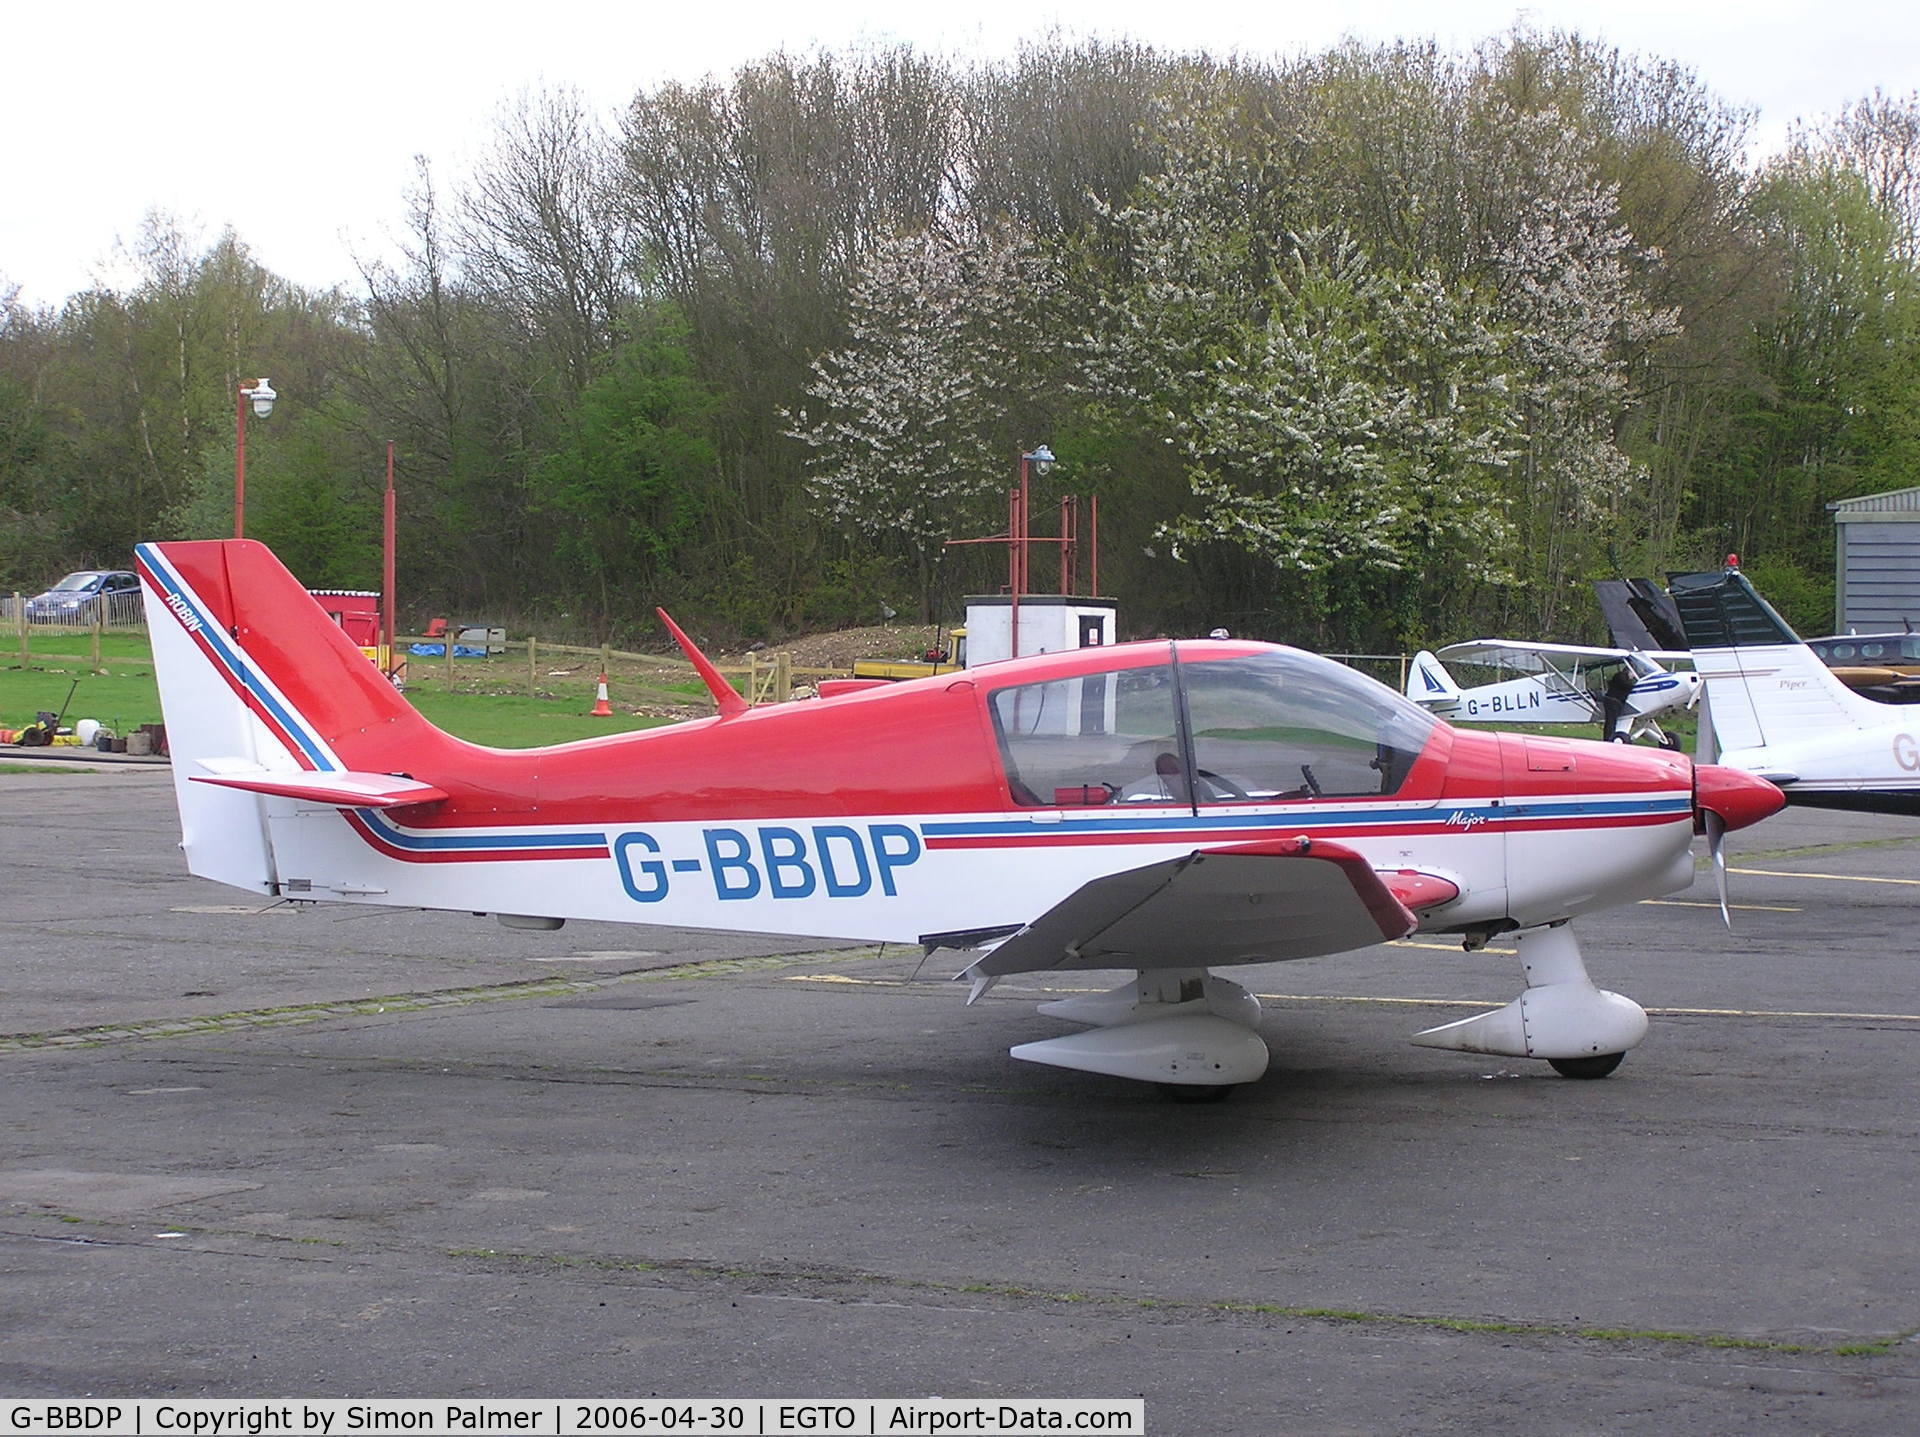 G-BBDP, 1973 Robin DR-400-160 Chevalier C/N 853, Robin DR400 at an airfield in Kent